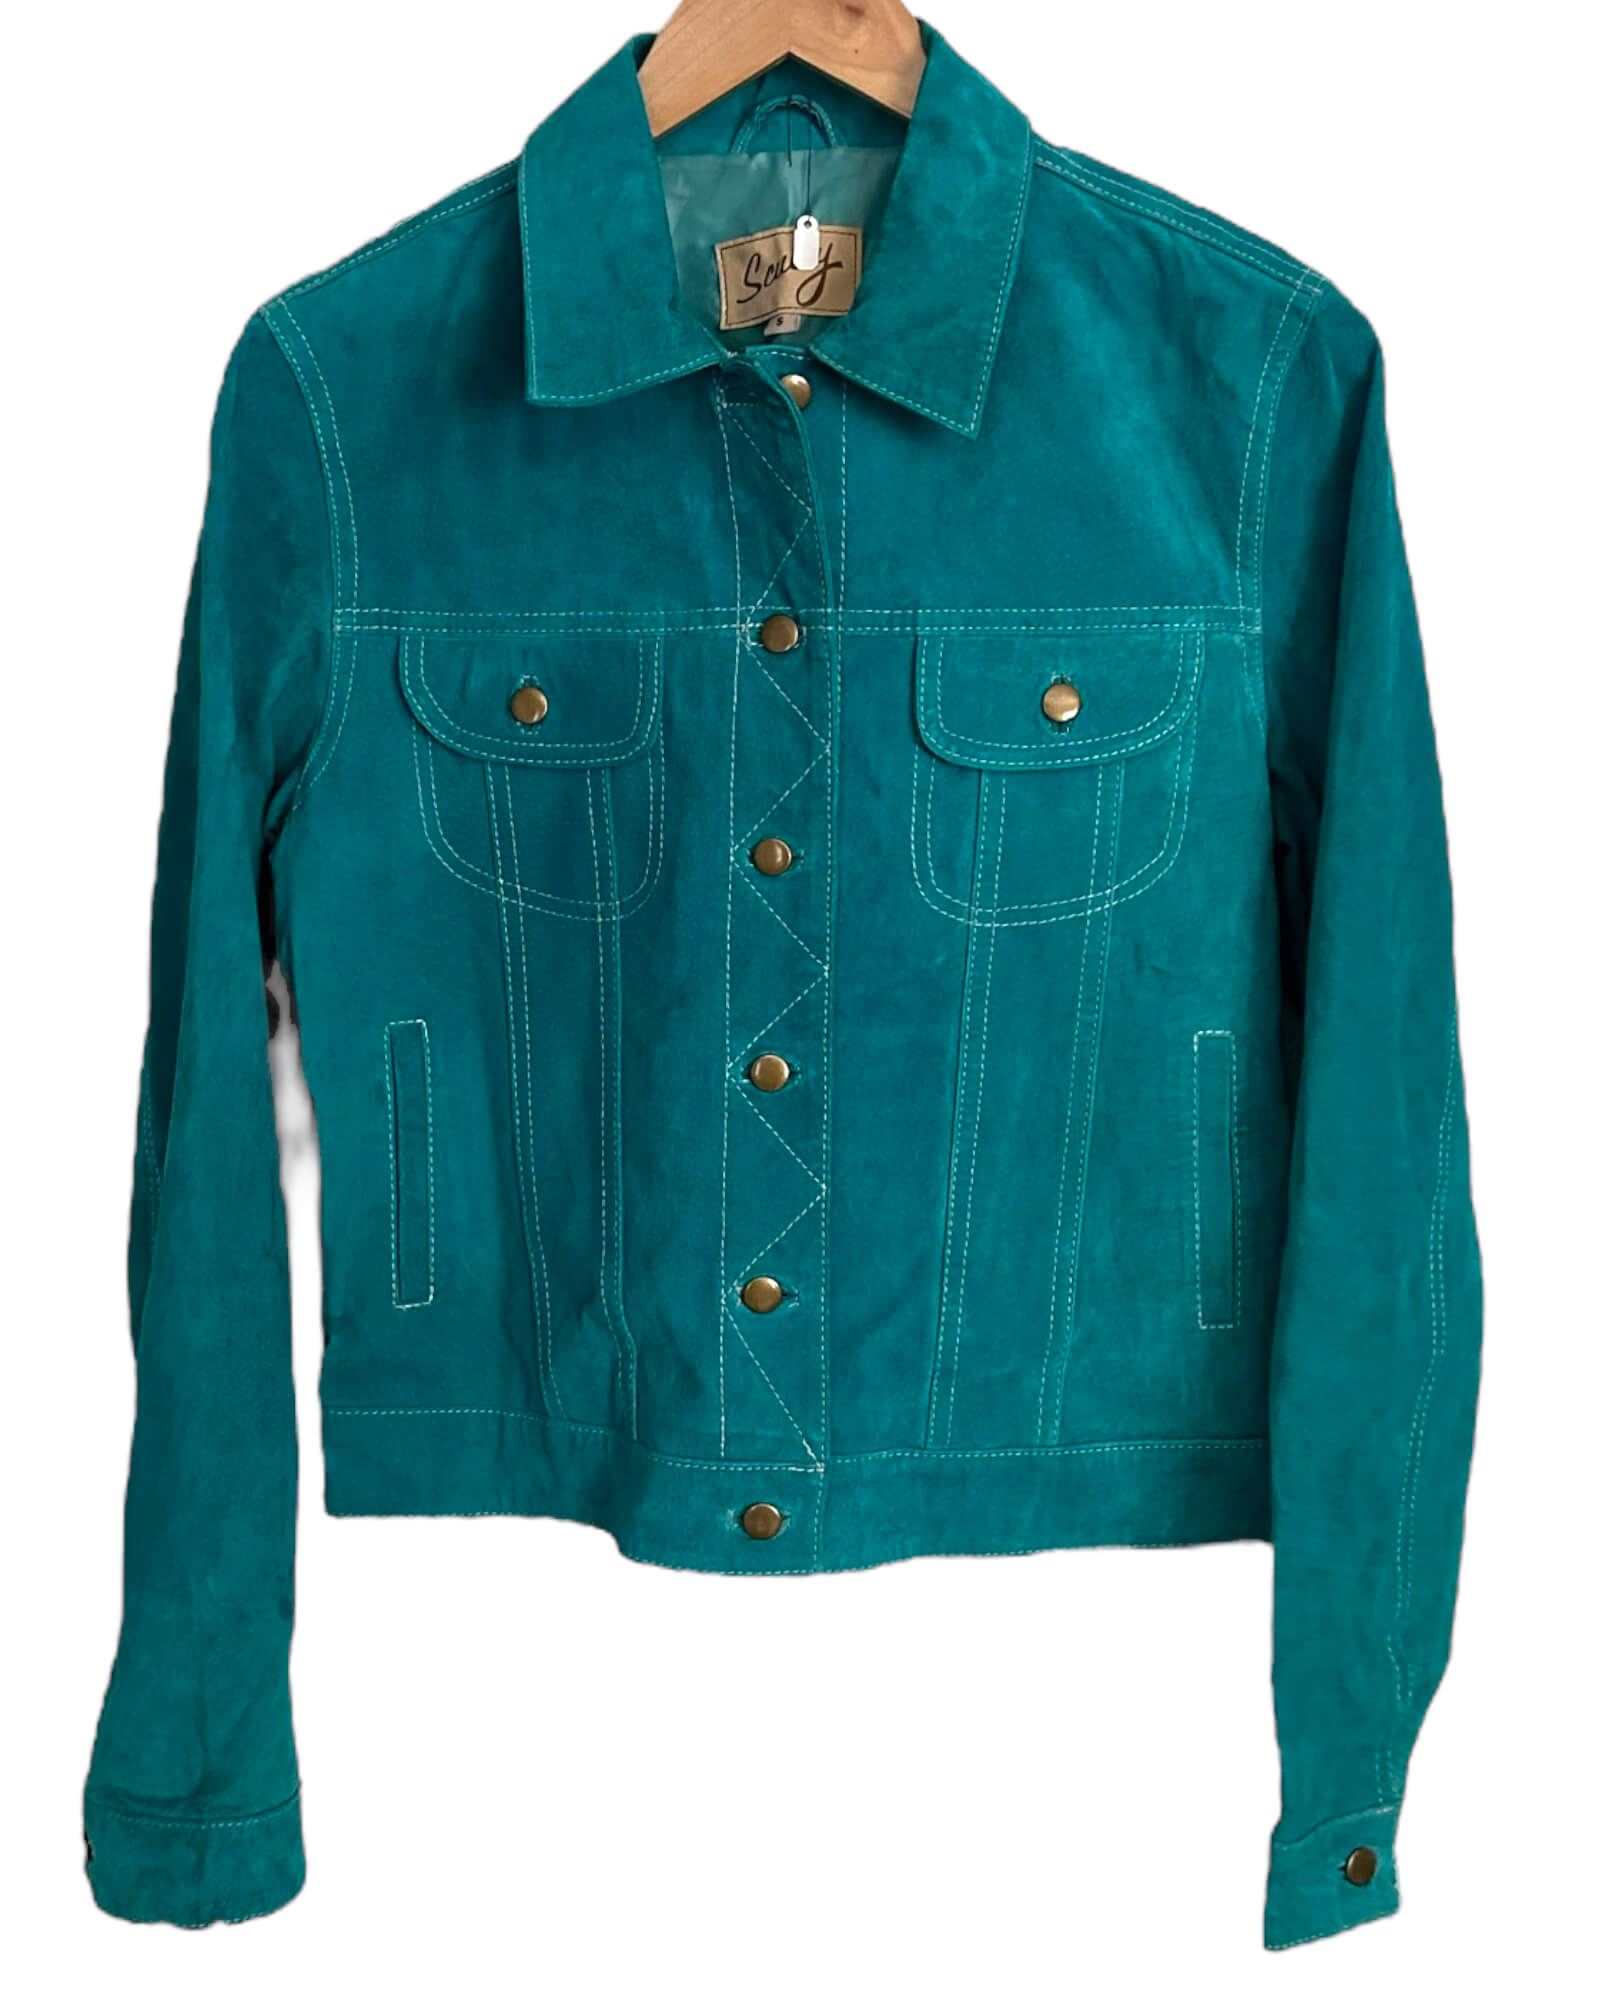 Warm Autumn SCULLY teal suede jacket